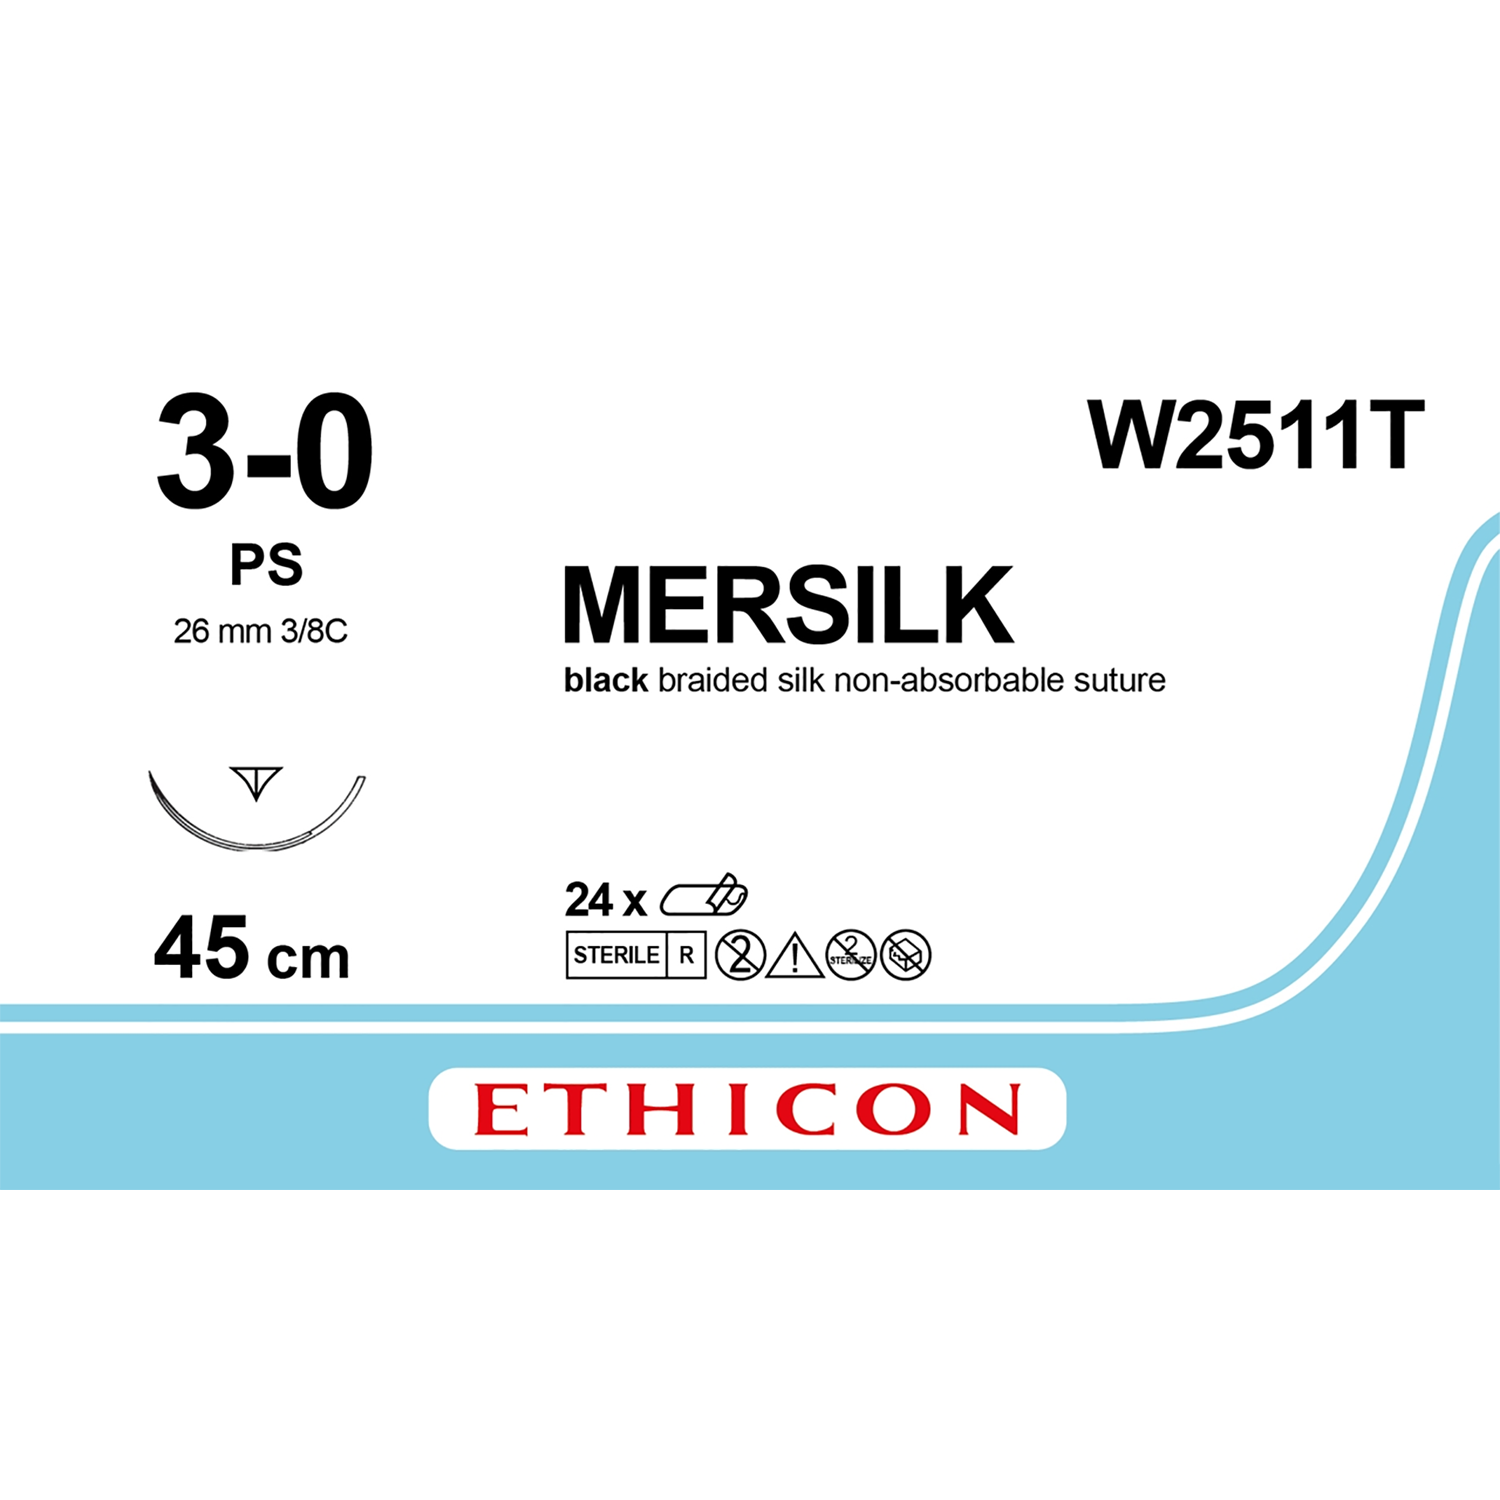 Ethicon Mersilk Suture | Non Absorbable | Black | Size: 3-0 | Length: 45cm | Needle: PS Prime | Pack of 24